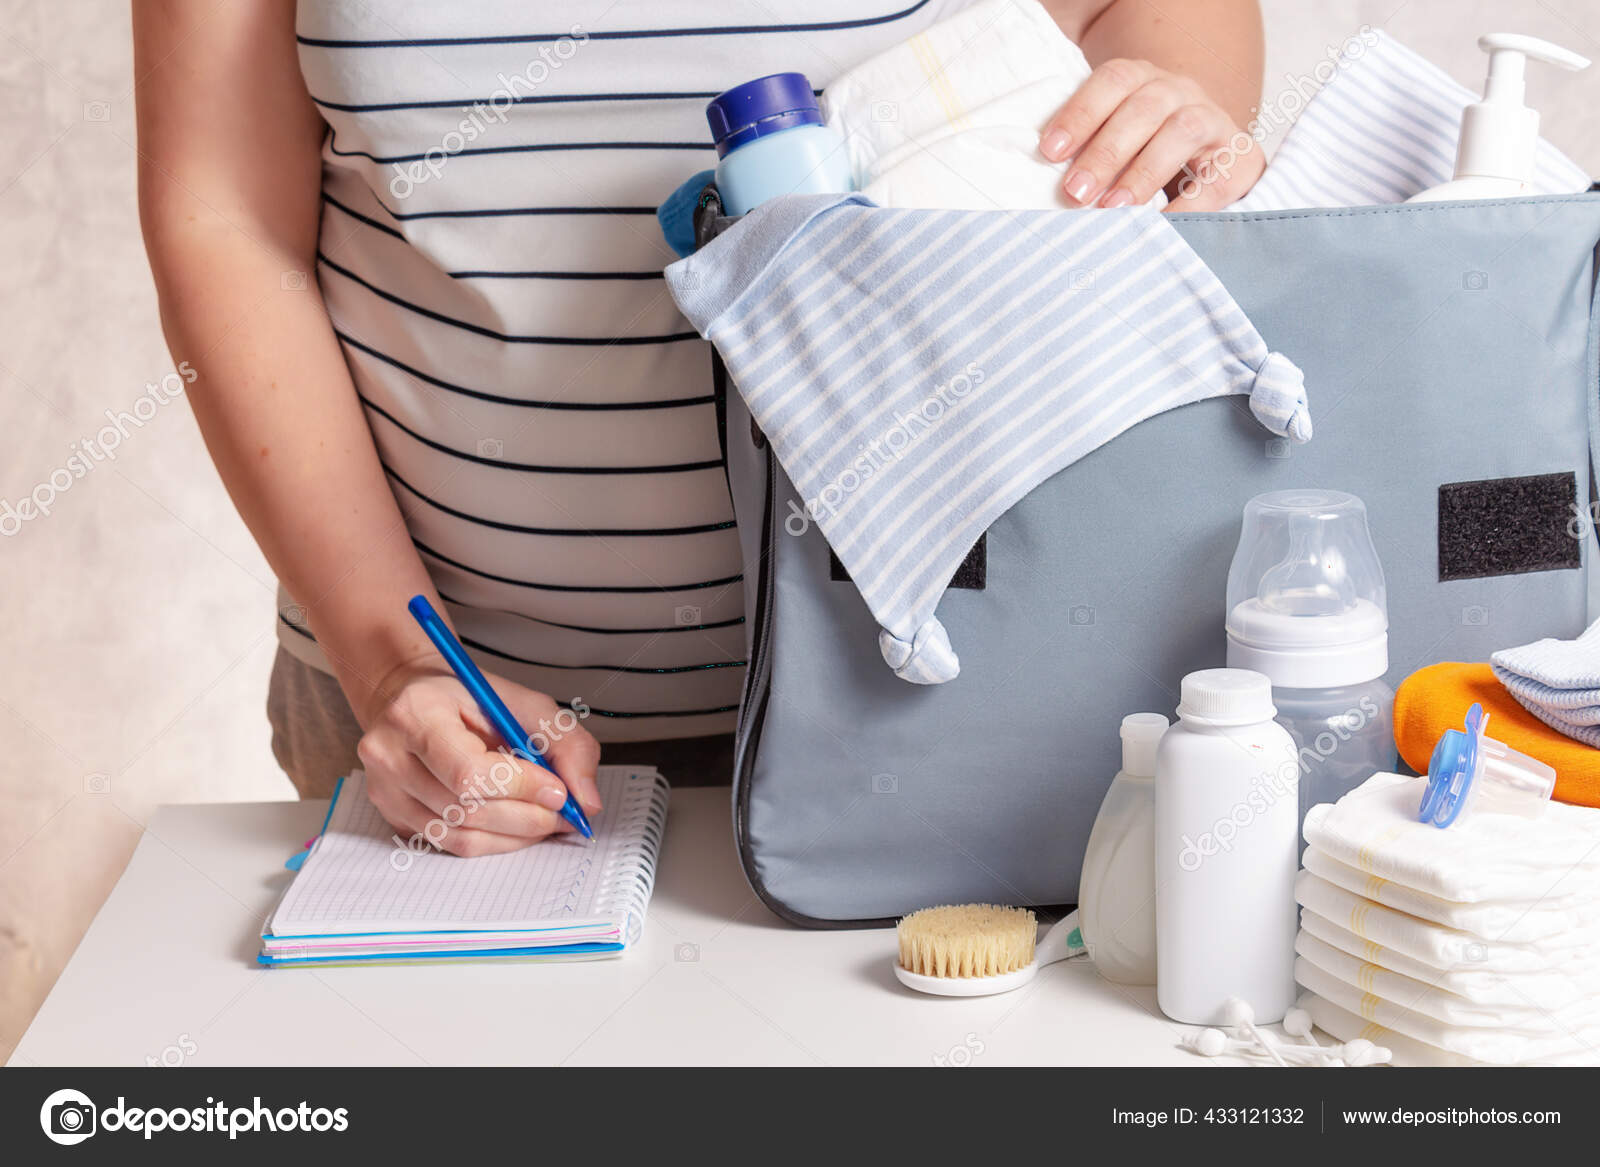 Woman packing diaper bag in maternity hospital. Stock Photo by